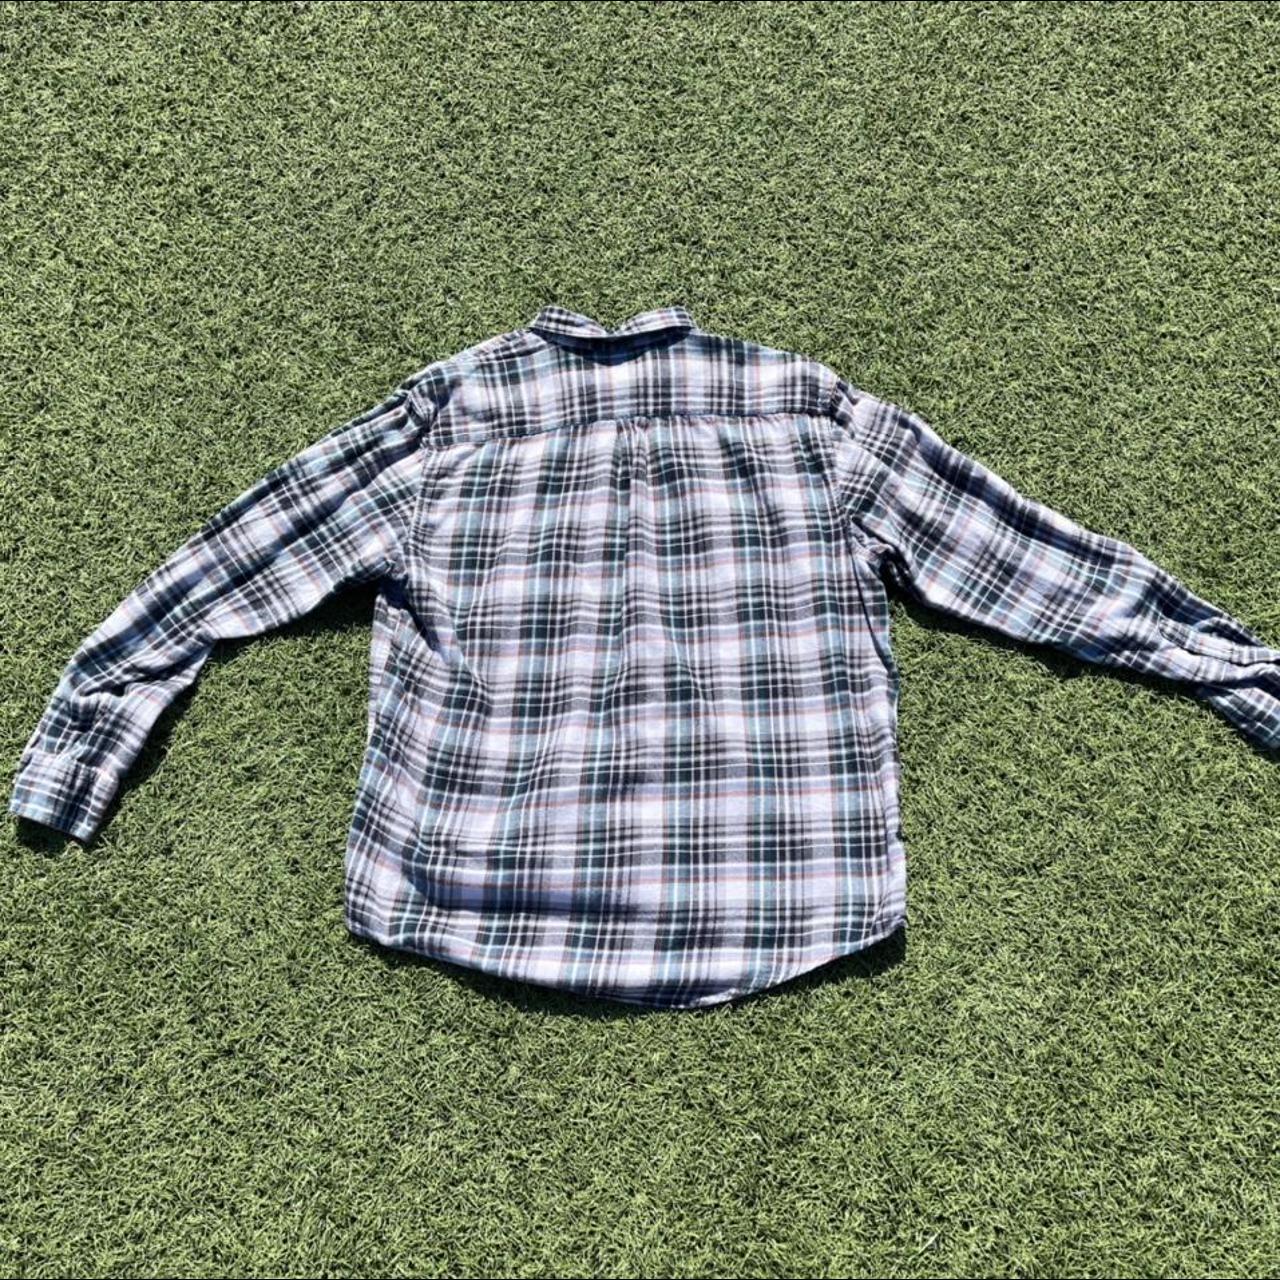 Product Image 3 - G.H. Bass - Flannel 👕

Size